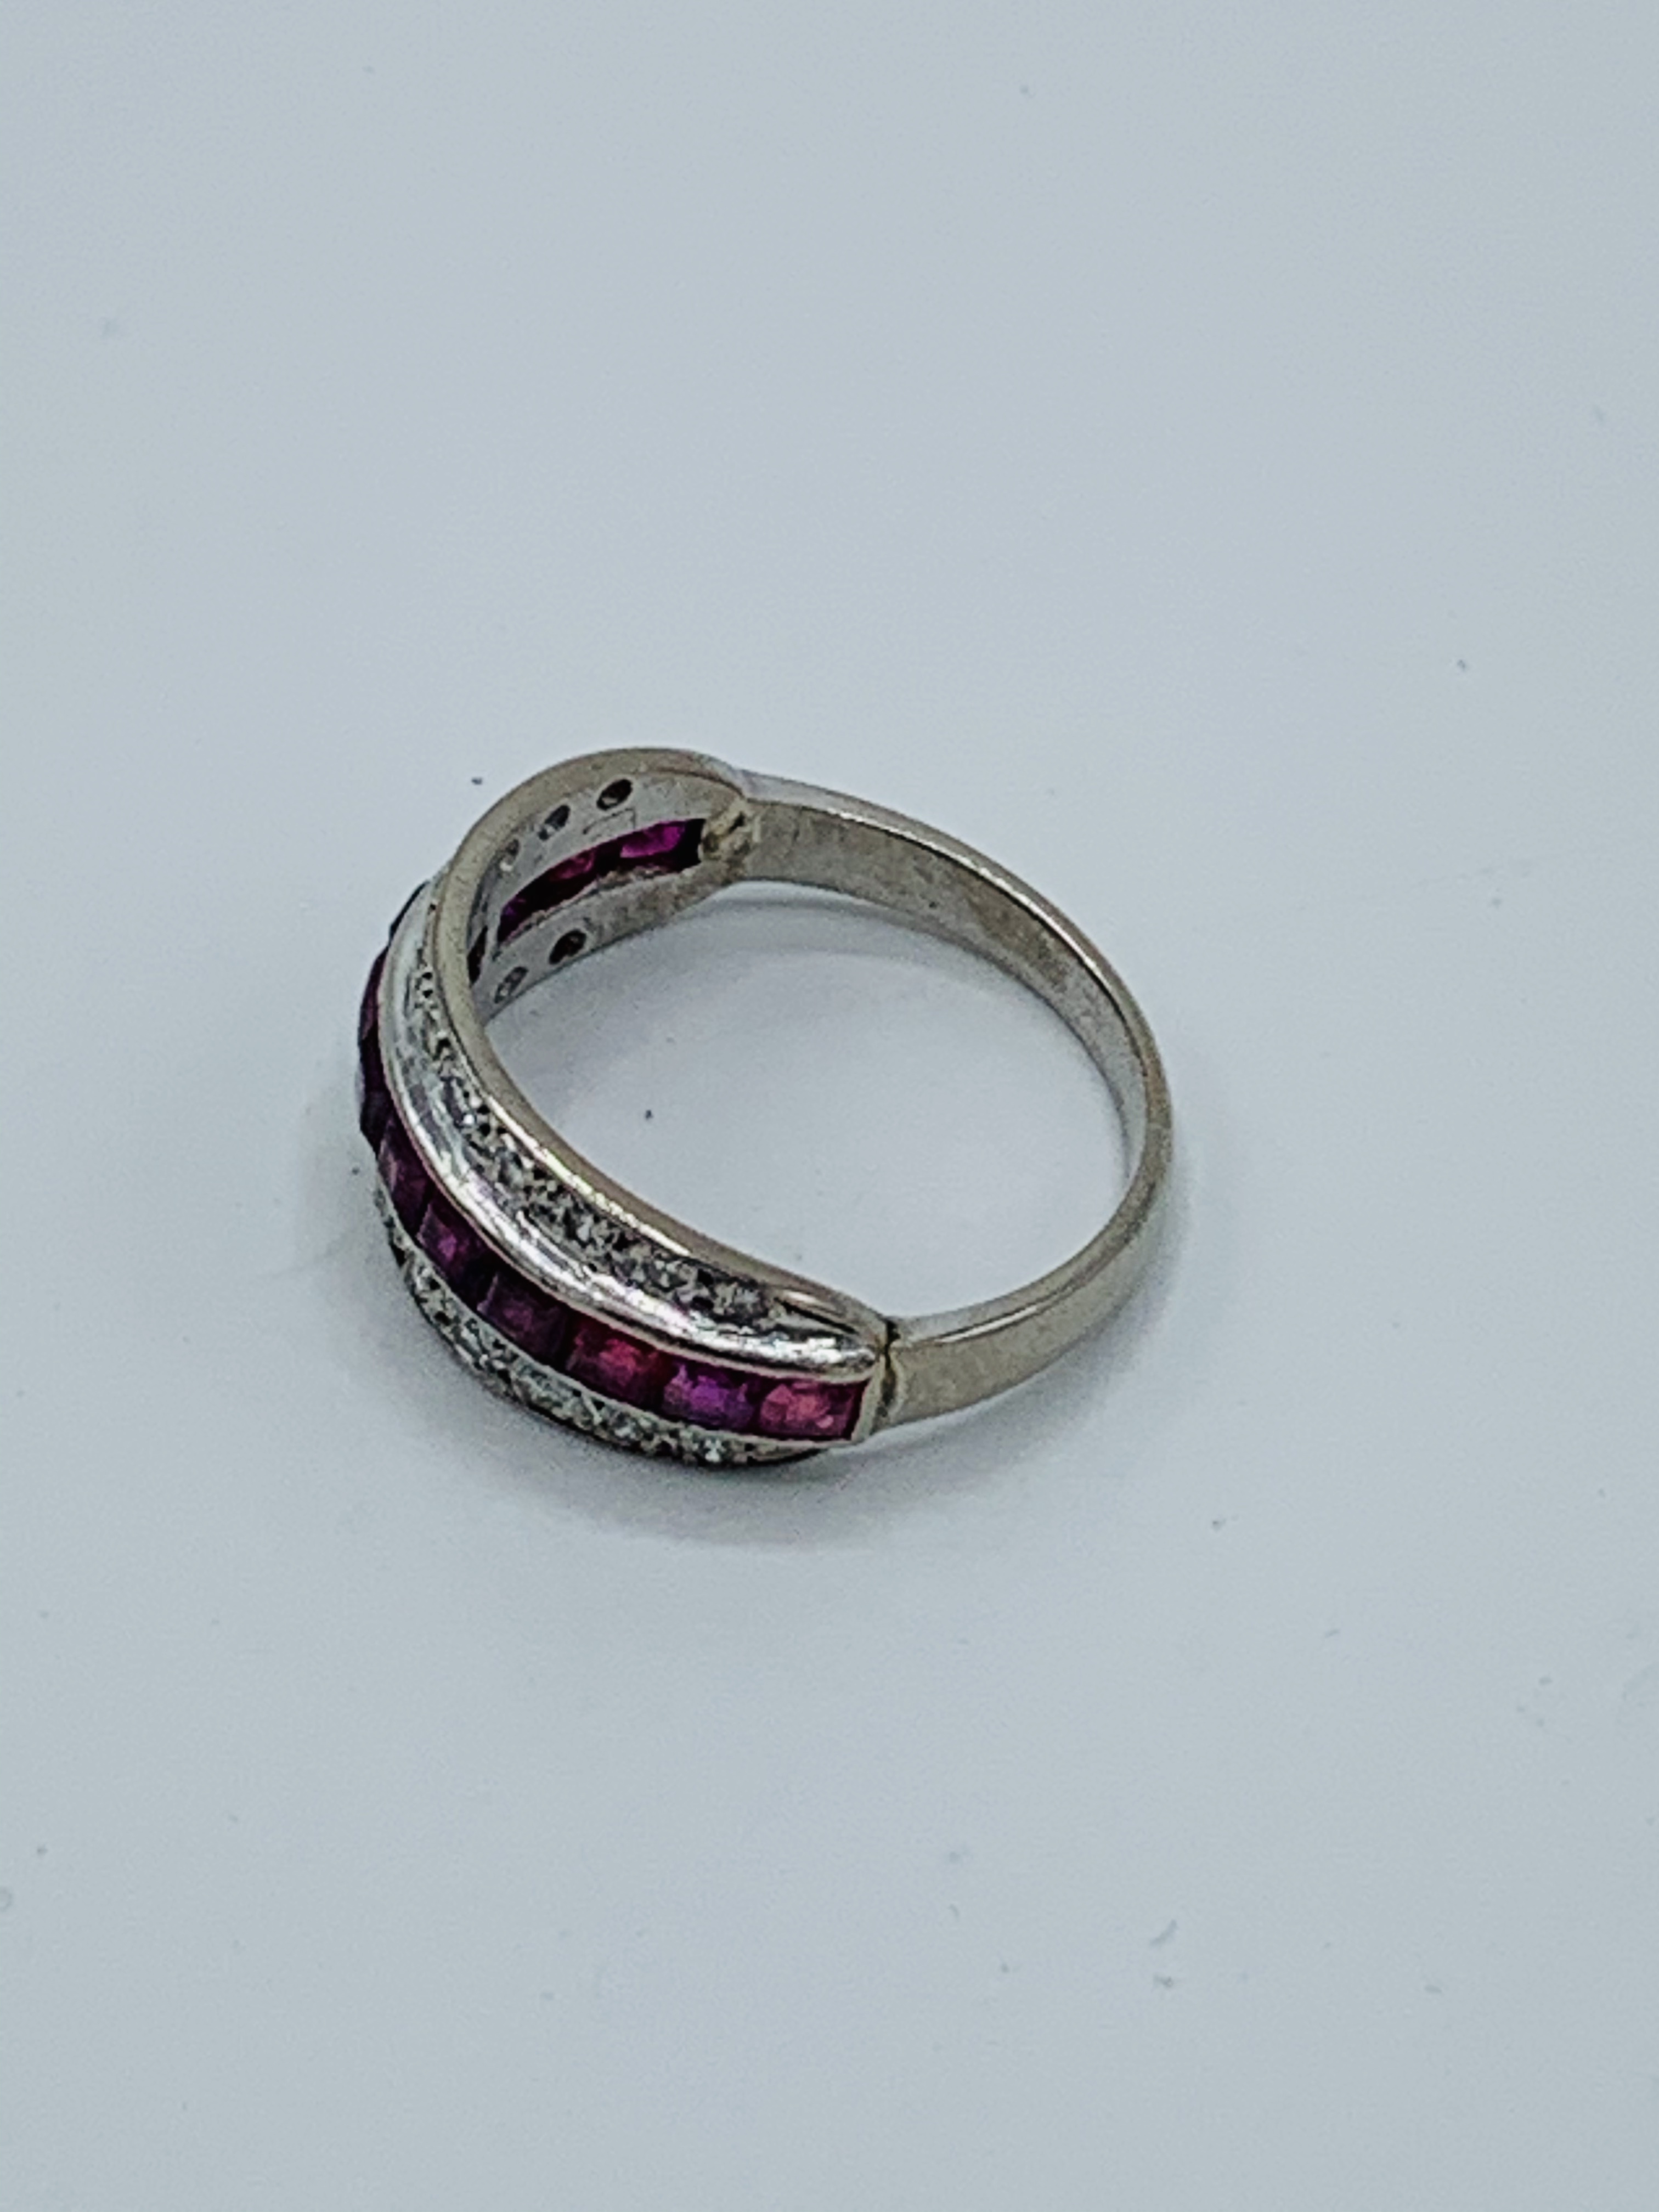 18ct white gold Art Deco diamond and ruby half eternity ring. Size O. Weight 4.6 gms - Image 3 of 3